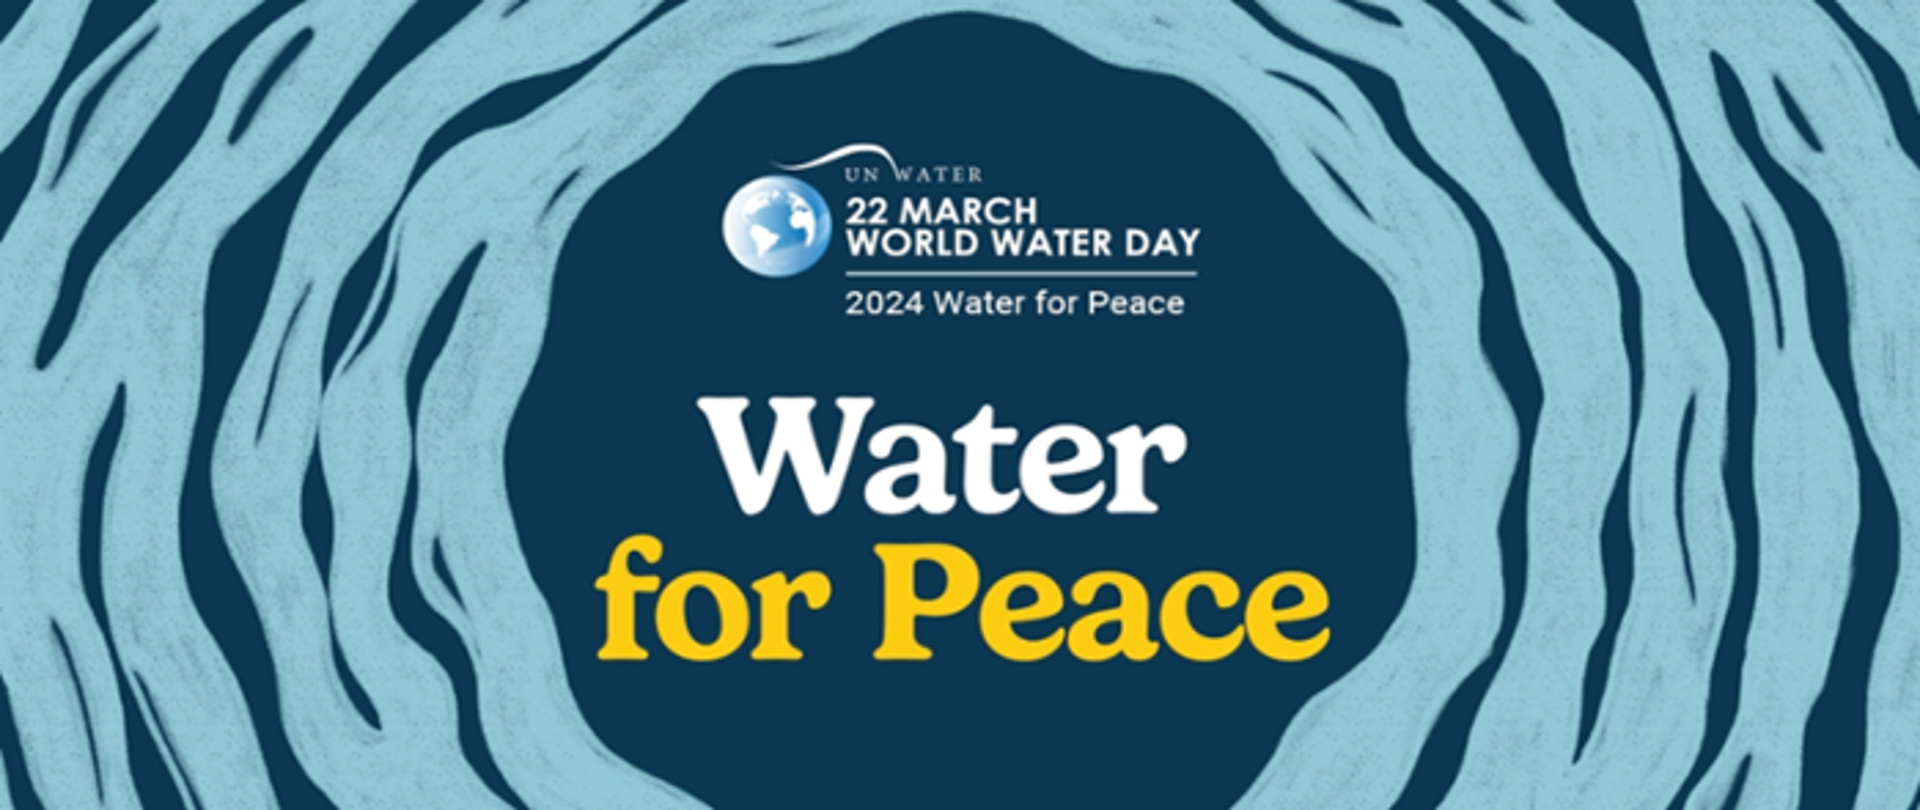 na niebieskim tle napis 22 march world water day Water fot Peace